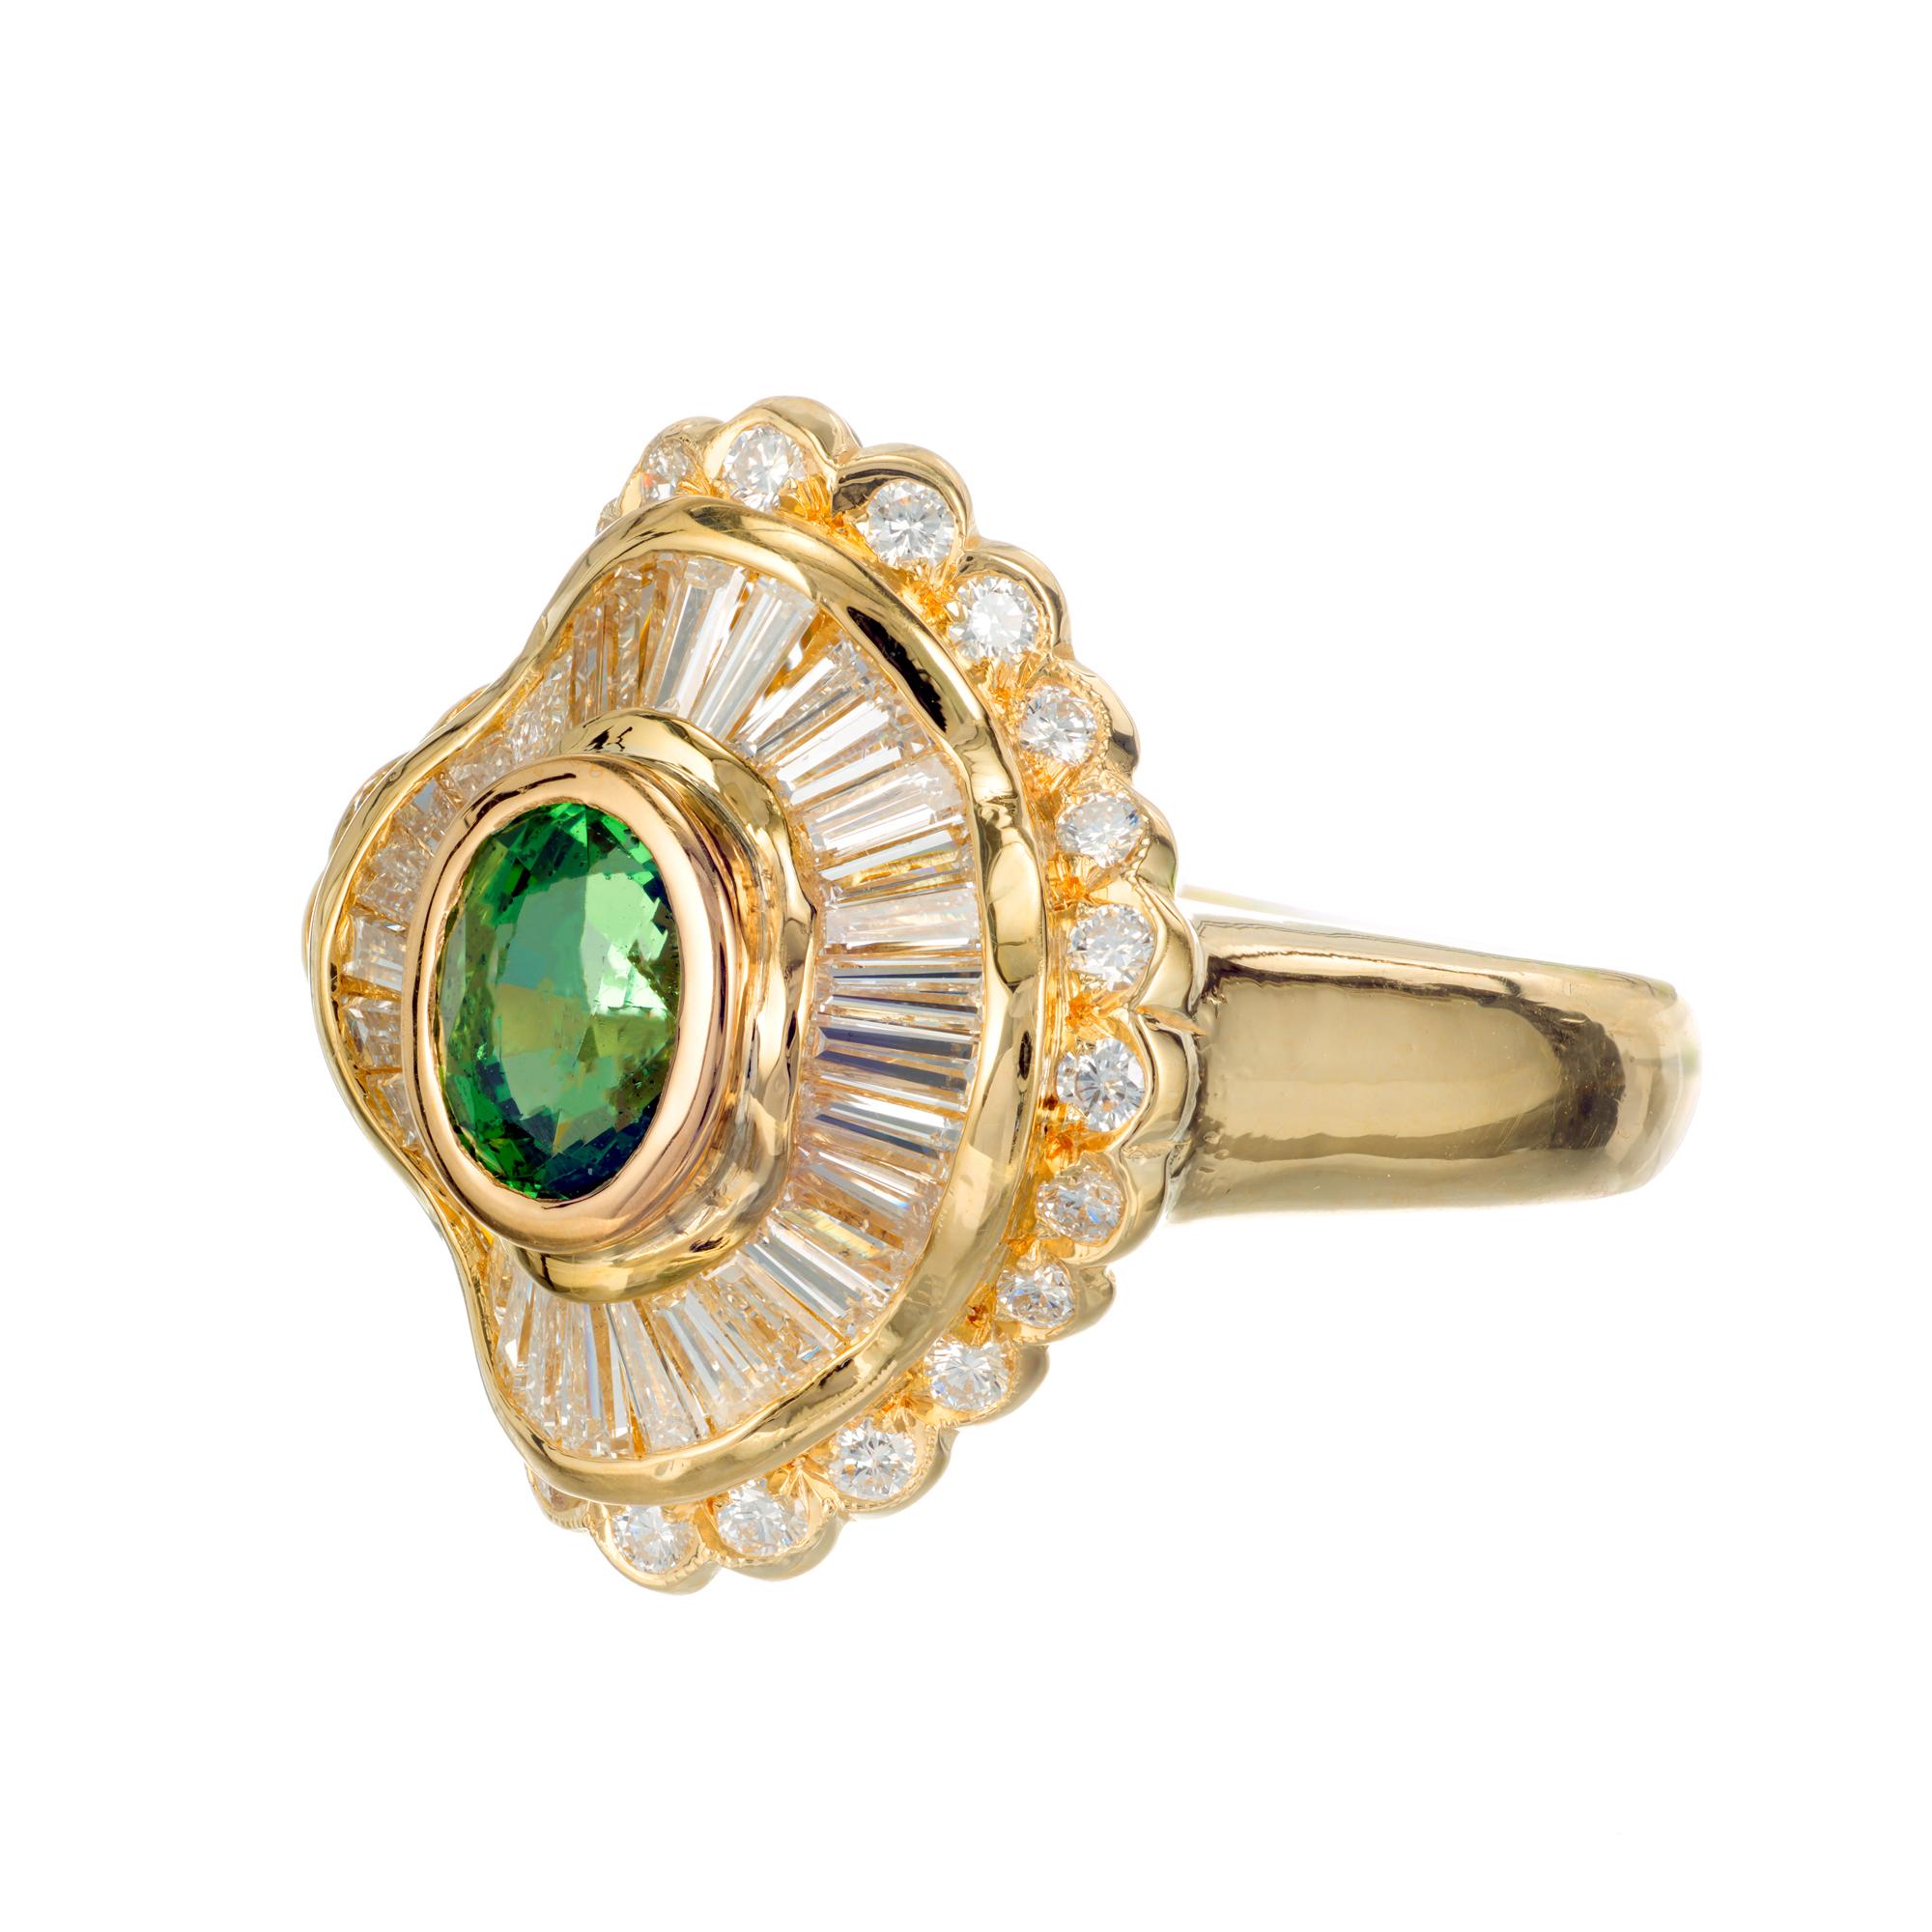 1970's green tsavorite and diamond cocktail ring. GIA certified oval green garnet center stone, set in 18k yellow gold setting with round and baguette accent diamonds om princess style double halo design. 

1 oval green tsavorite garnet, Approximate